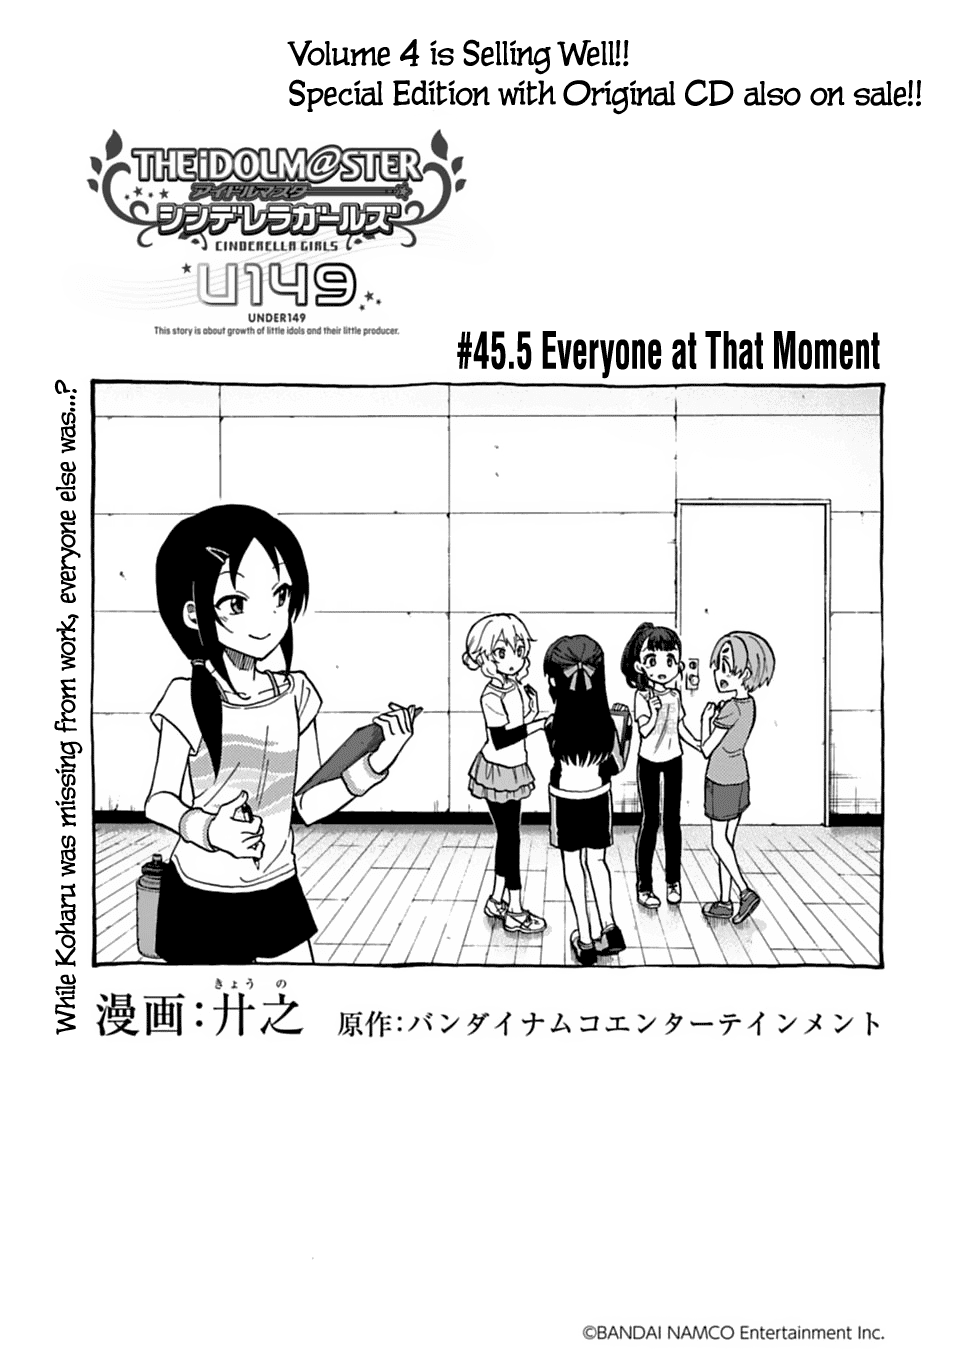 The Idolm@ster Cinderella Girls - U149 Chapter 45.5: Everyone At That Moment - Picture 1